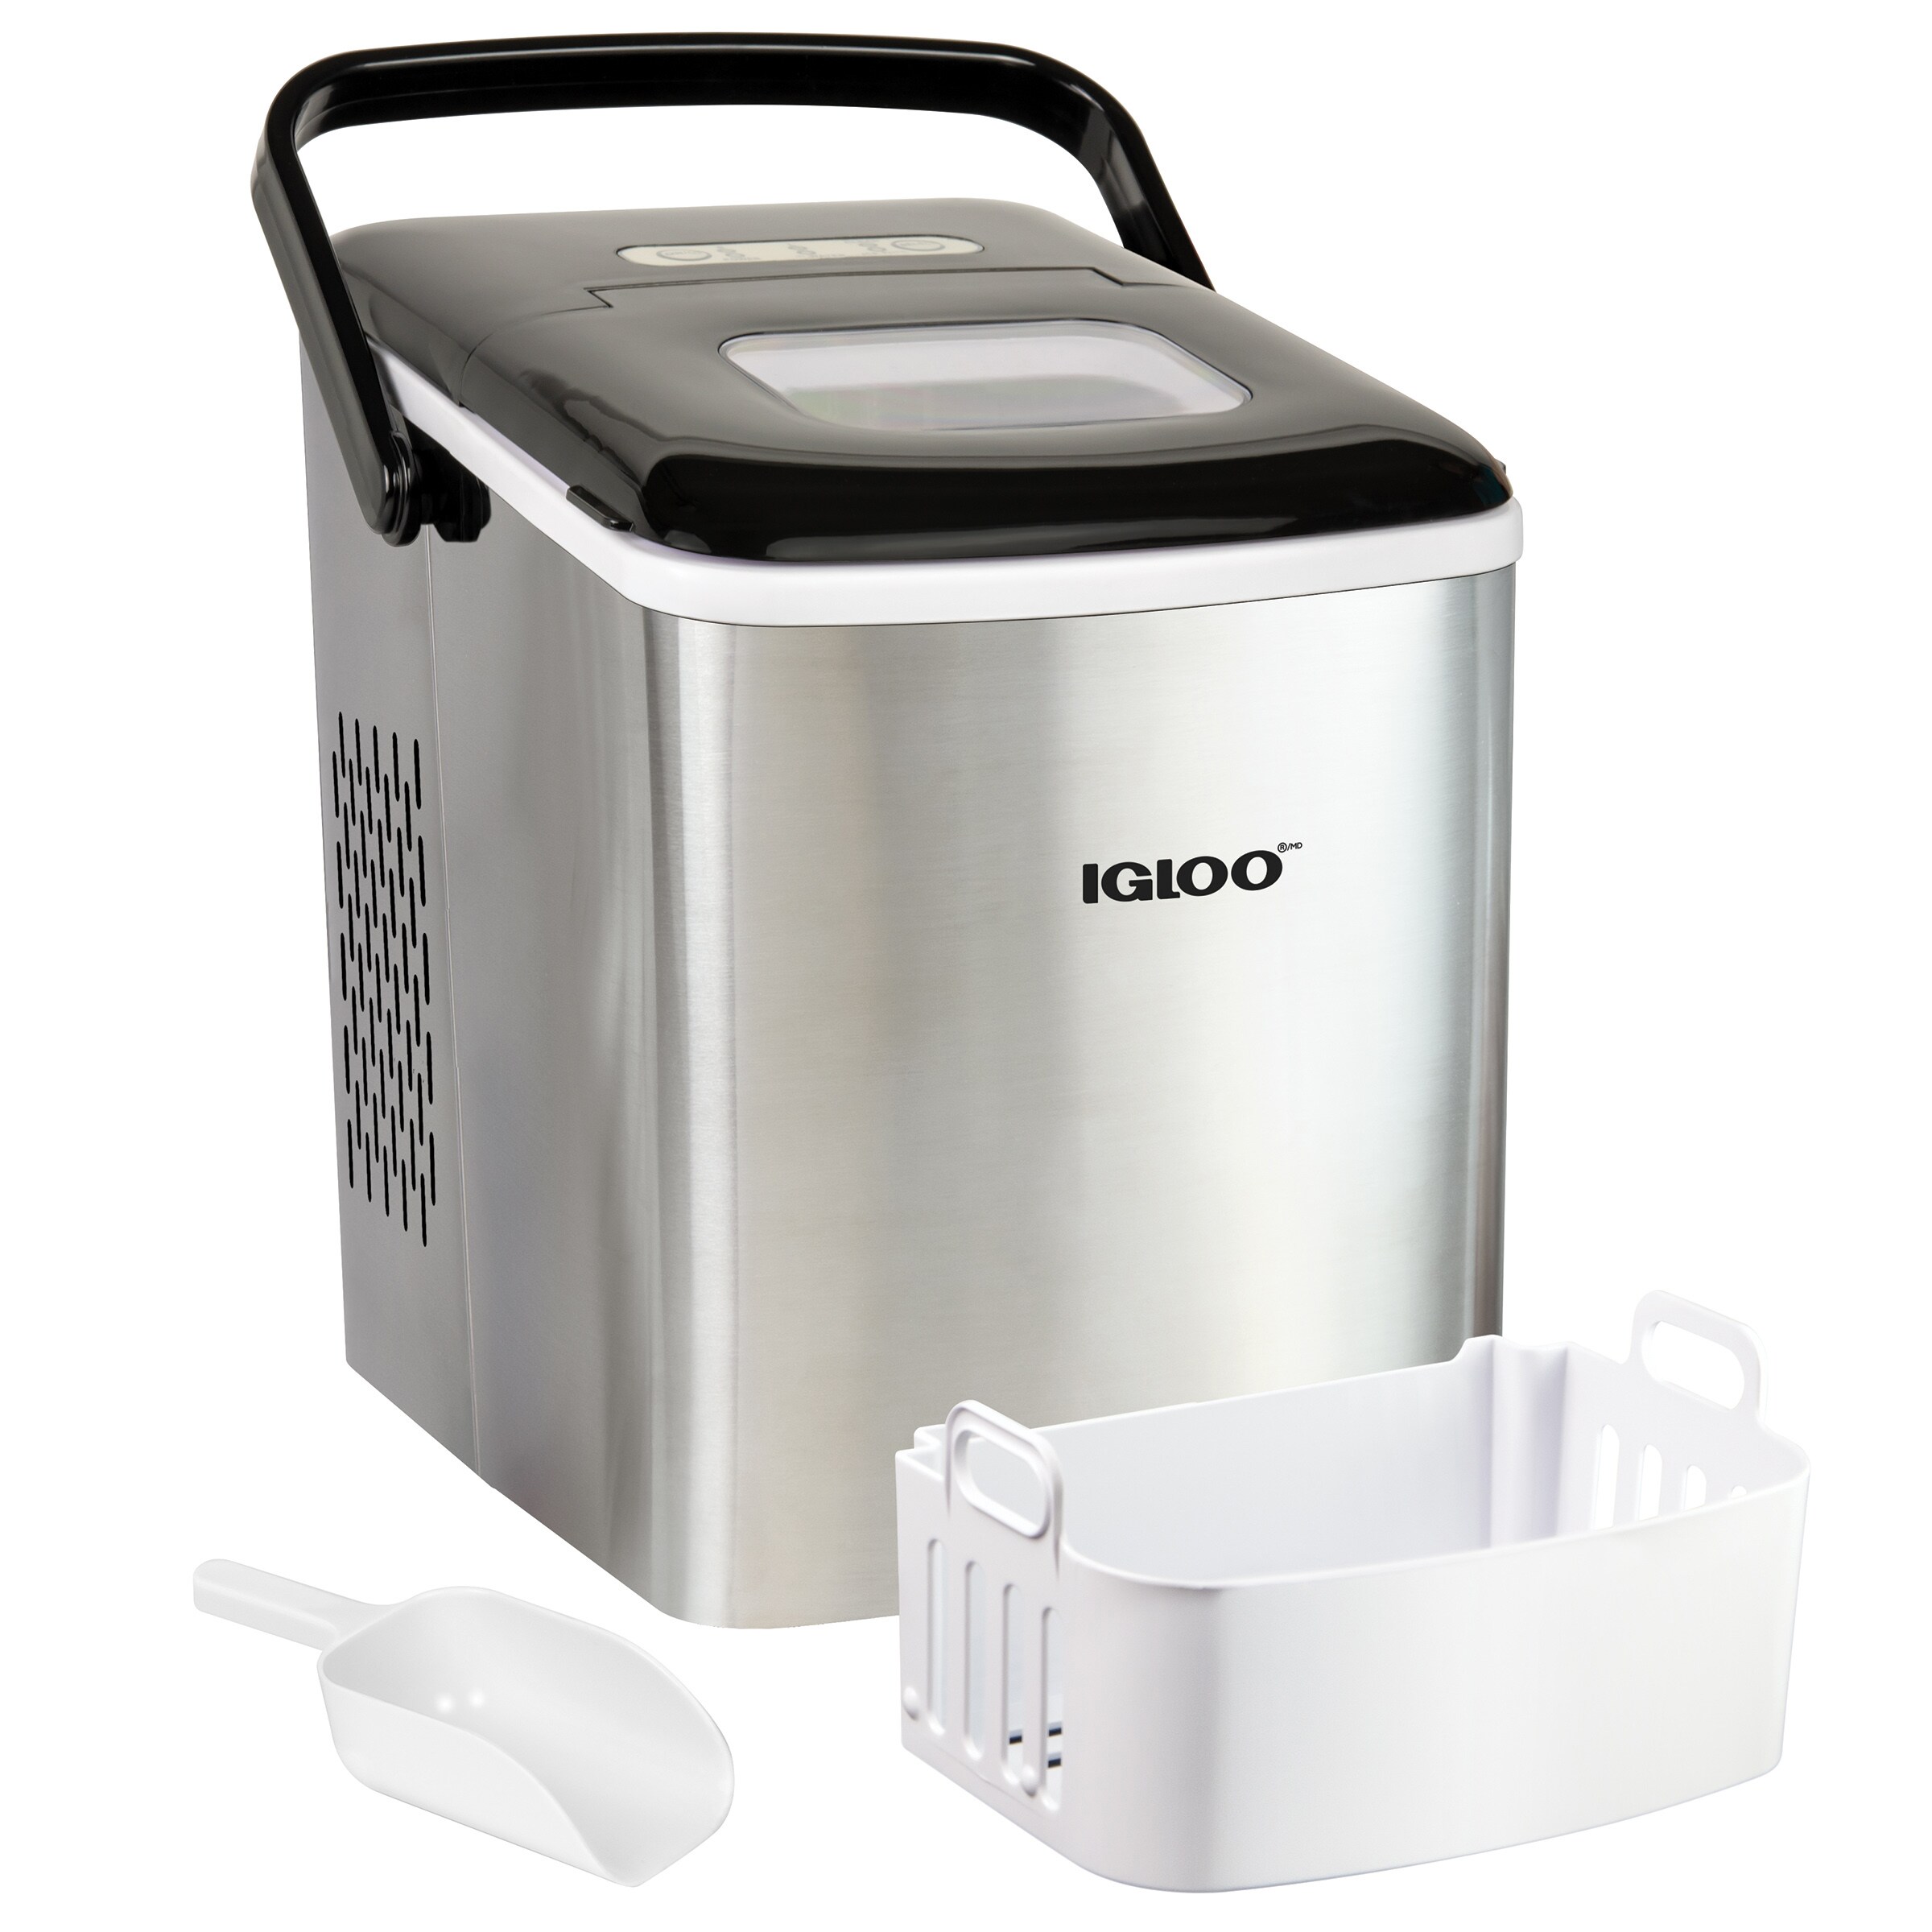 Save $60 on an Igloo Countertop Ice Maker and Have Your Drinks on